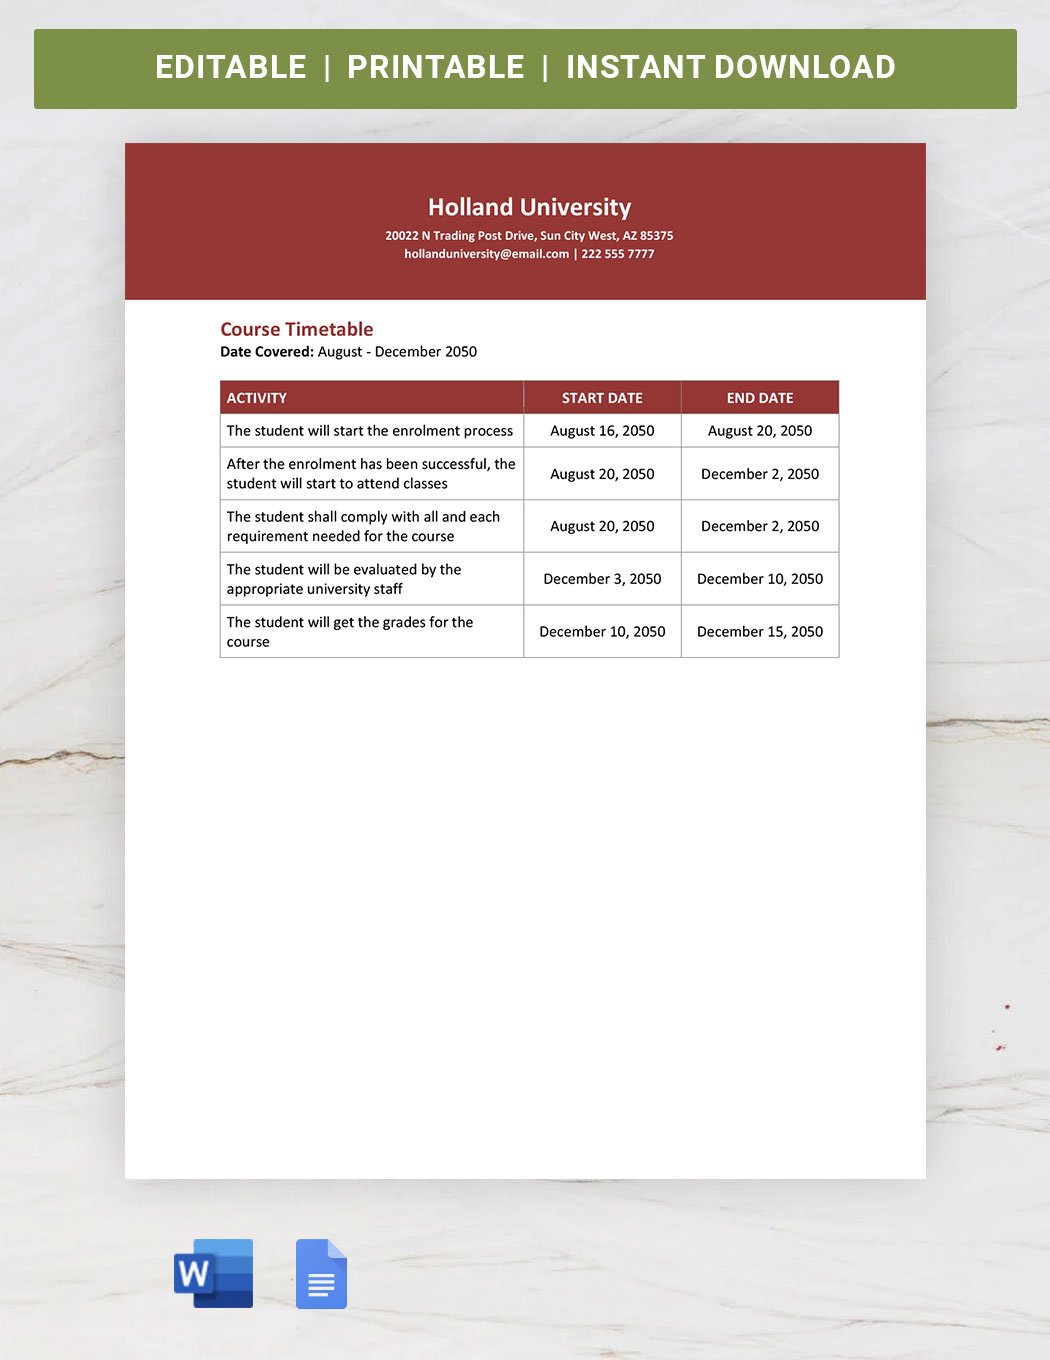 Course Timetable Template in Word, Google Docs, PDF, Apple Pages